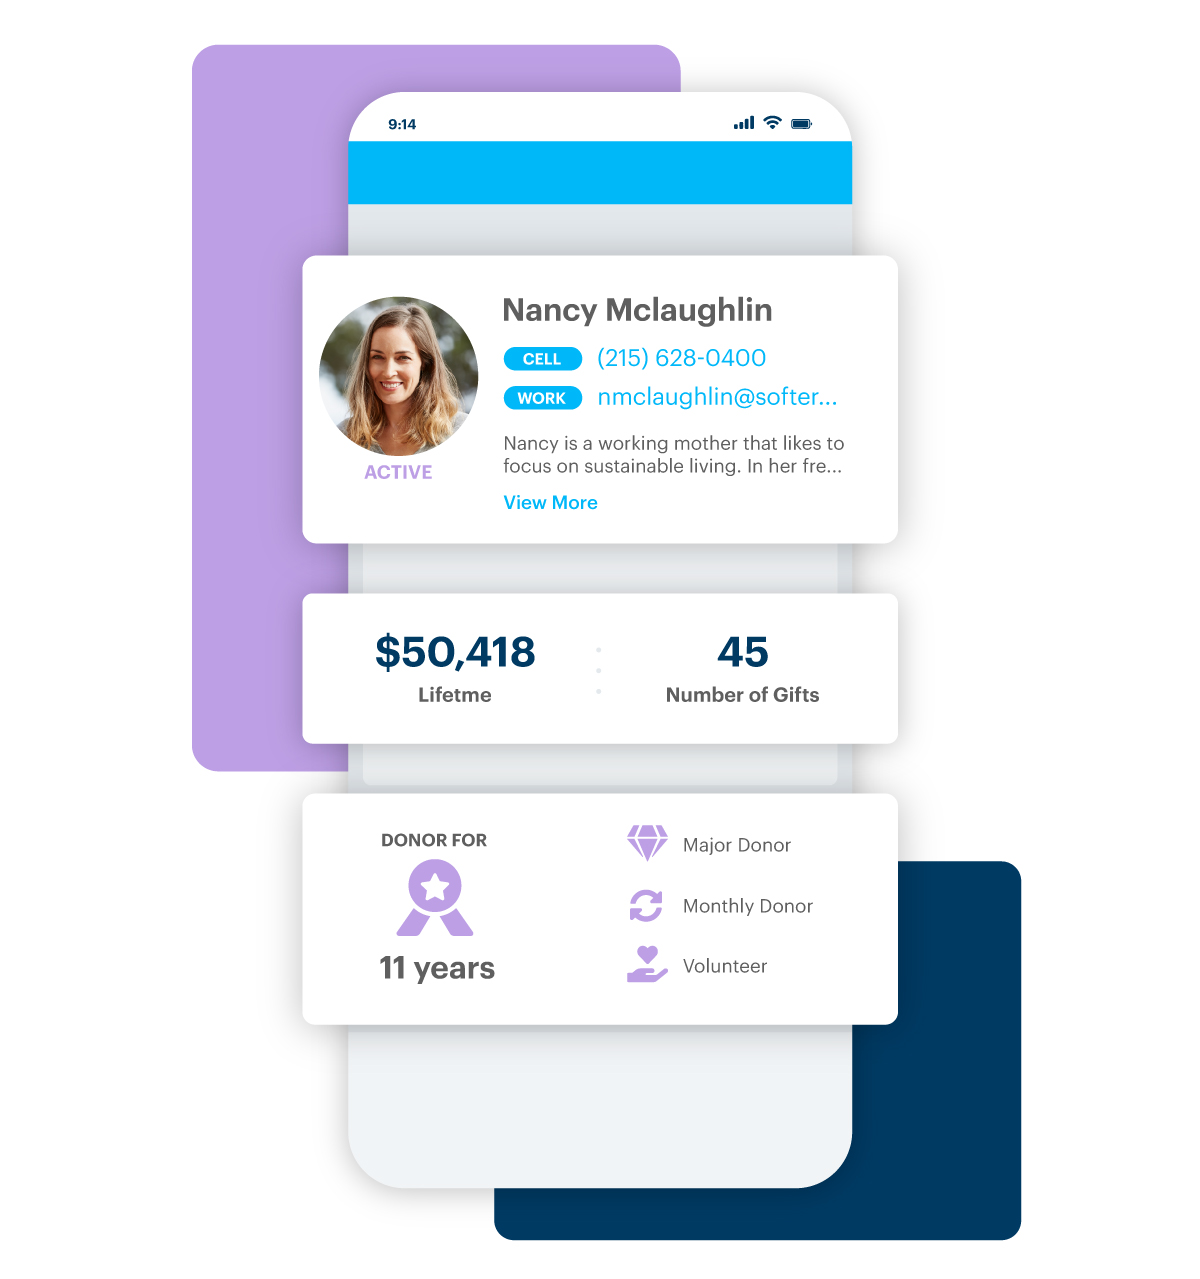 DonorPerfect mobile app Donor Profile